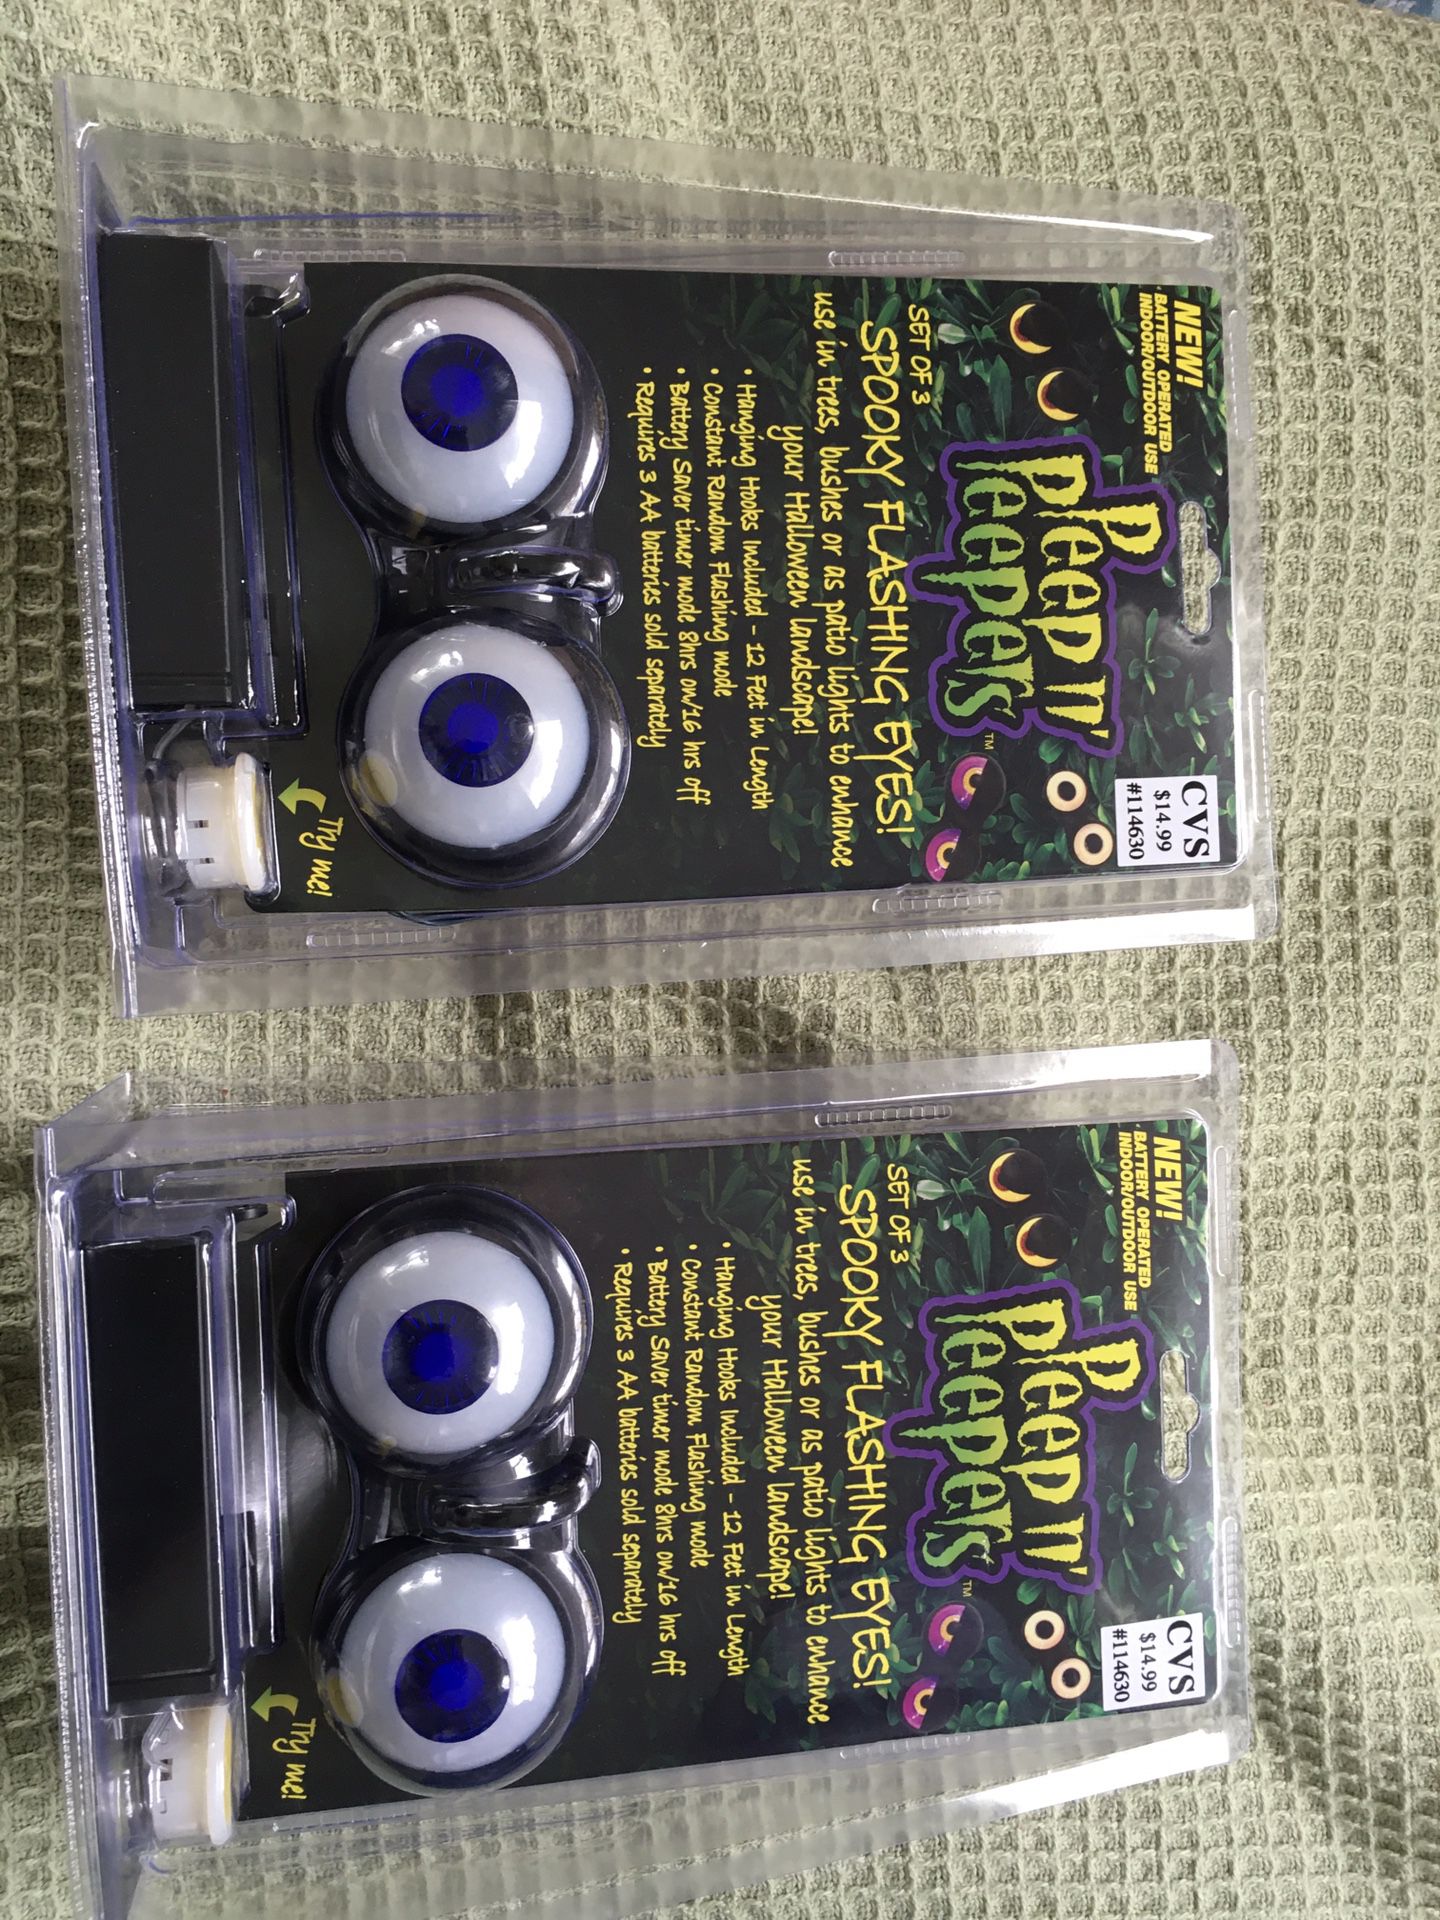 Next For Your consideration, Halloween Spooky flashing Eye decoration